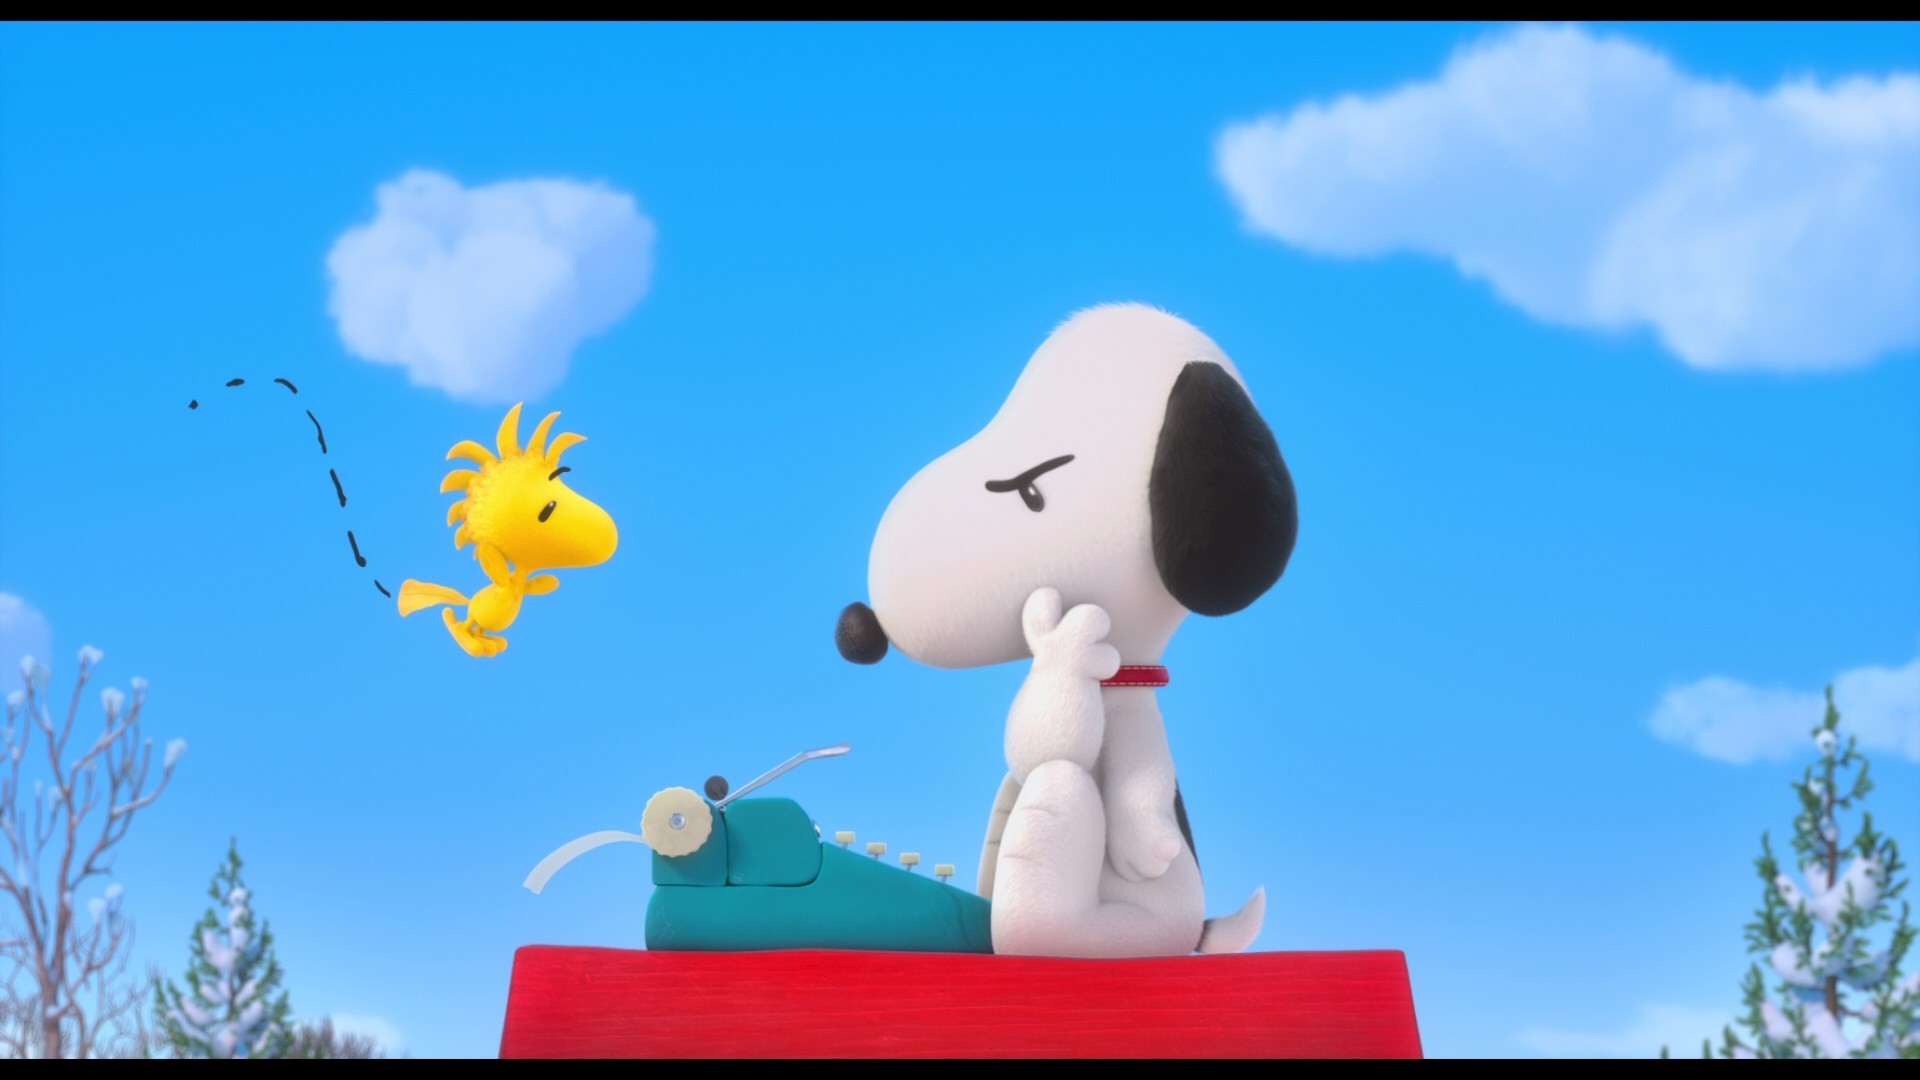 Peanuts Movie – Snoopy And Woodstock by BradSnoopy97